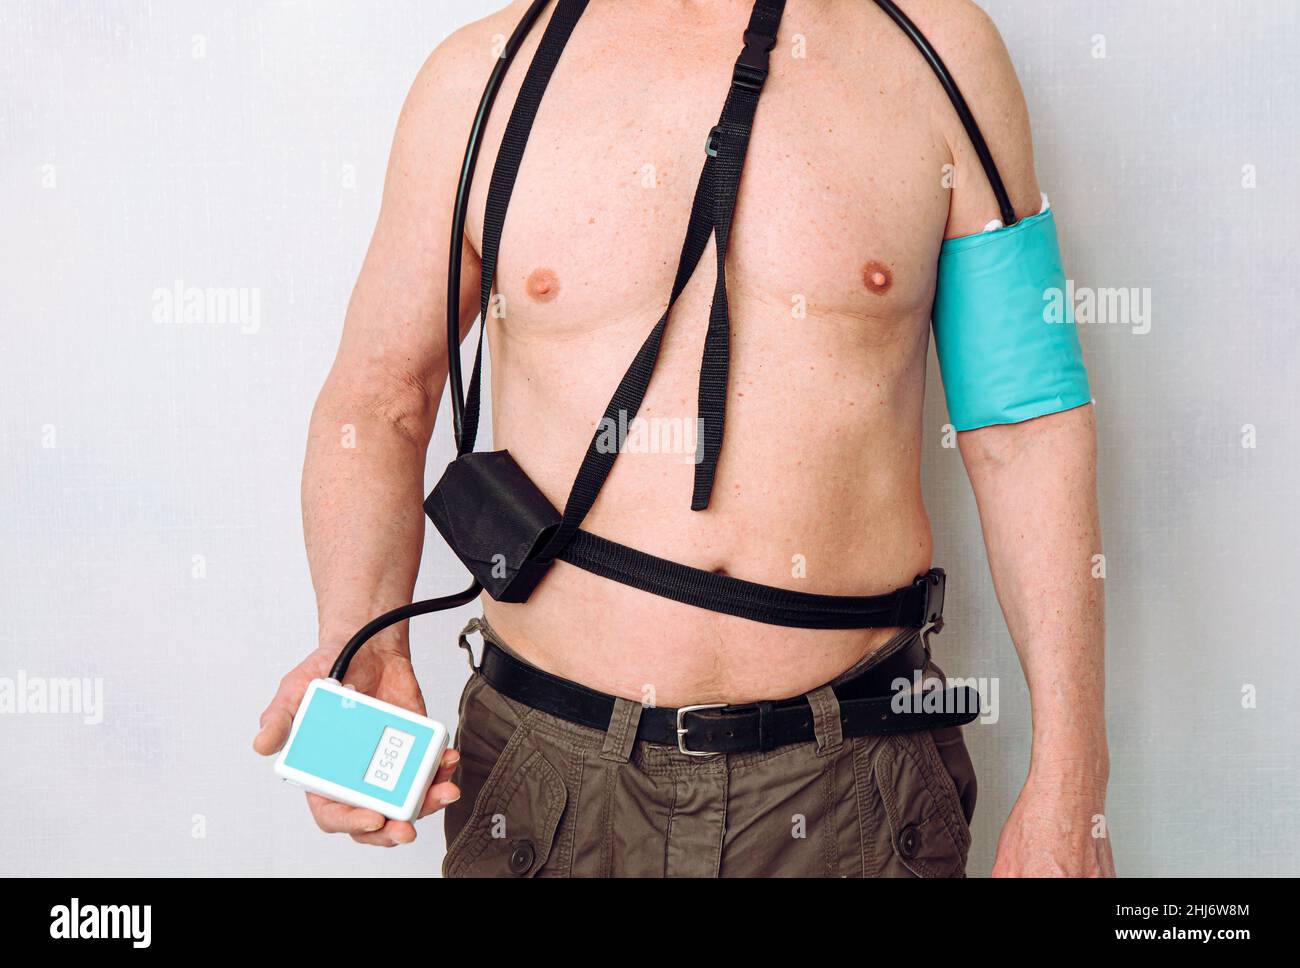 https://c8.alamy.com/comp/2HJ6W8M/body-of-a-middle-aged-man-using-portable-ambulatory-blood-pressure-monitor-abpm-for-taking-measurements-during-normal-daily-activities-at-home-2HJ6W8M.jpg